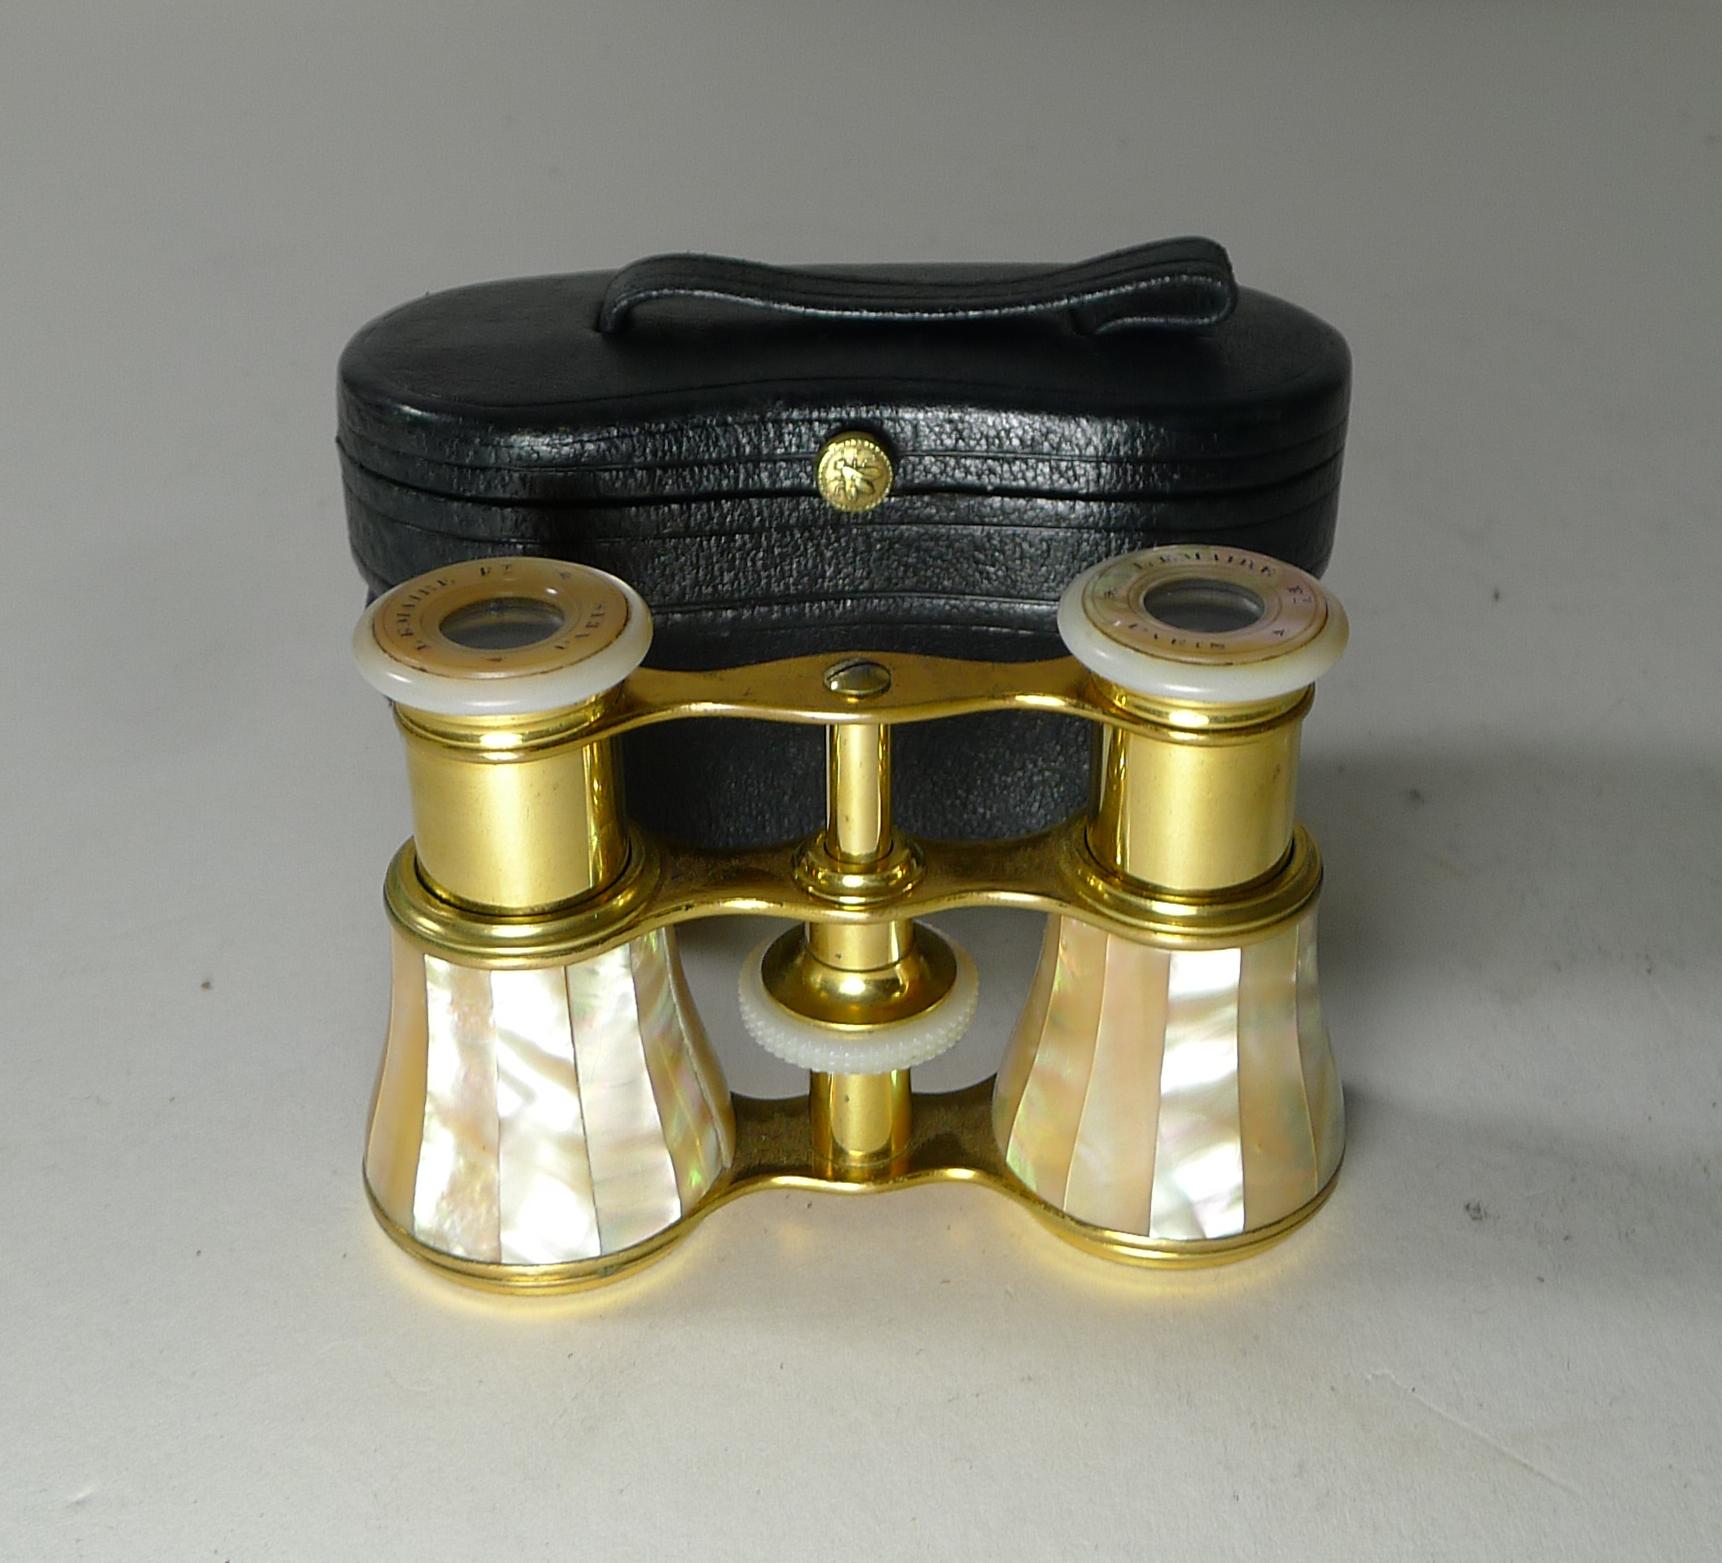 A very fine pair of late nineteenth century opera glasses made from Mother of Pearl and the original gilded brass; made by the creme de la creme of makers, LeMaire of Paris.

The makers mark (the Napoleonic Bee) is engraved on the underside of